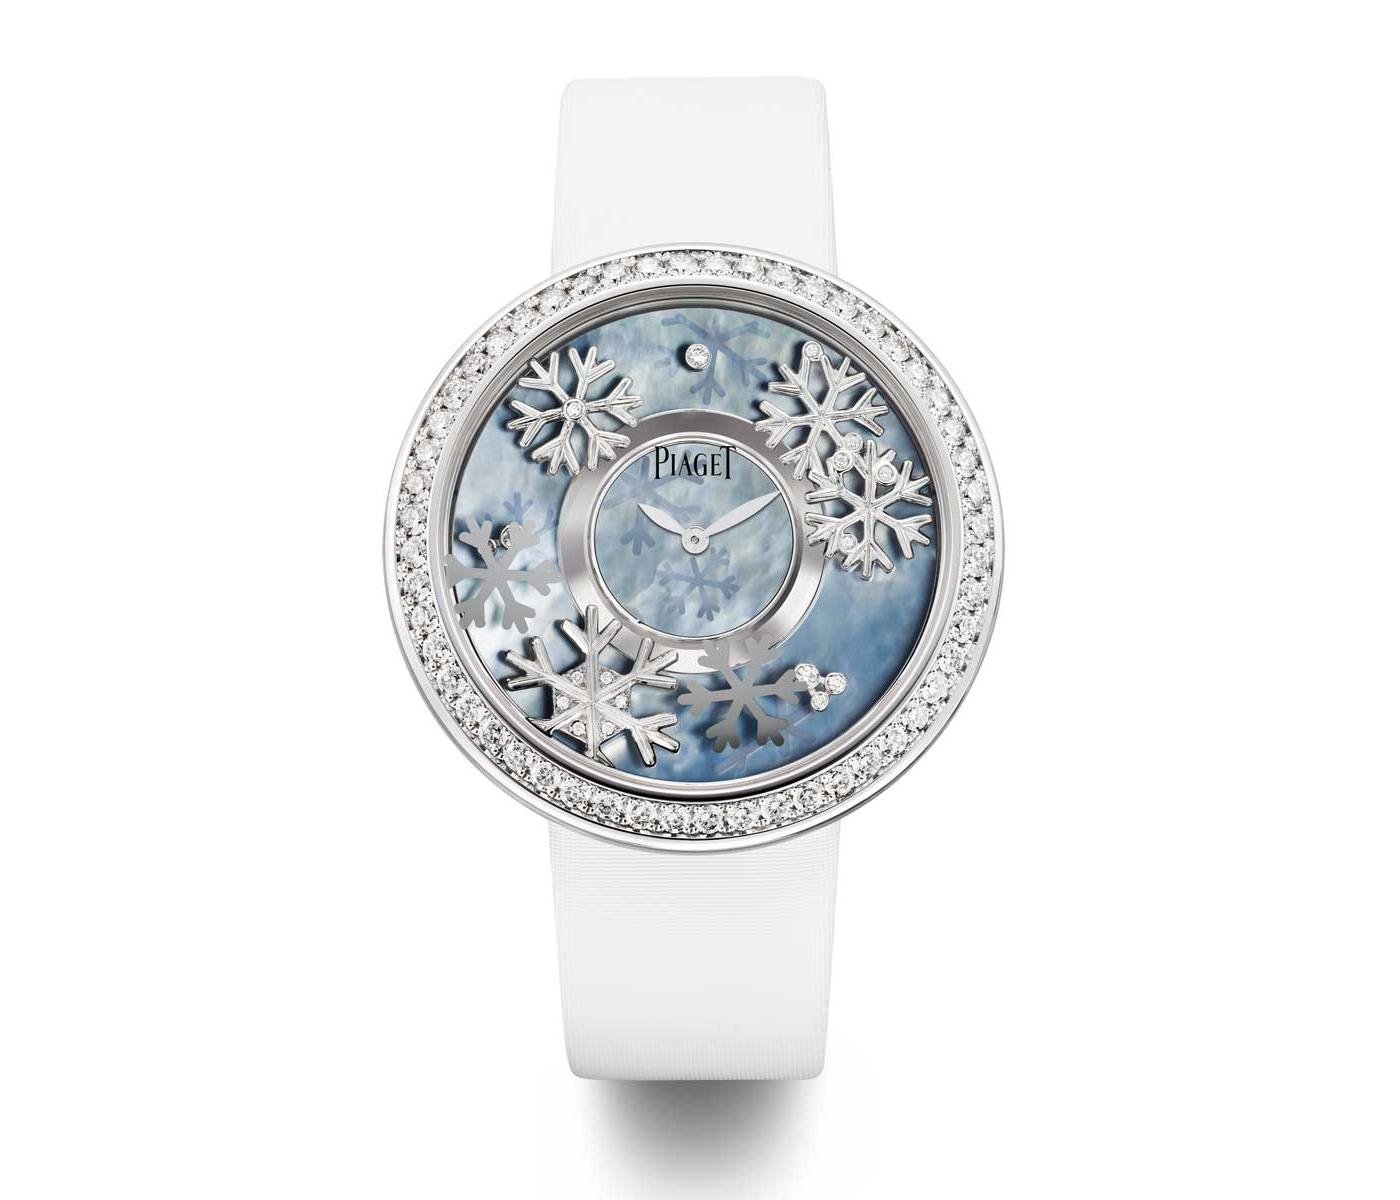 Watch by Piaget